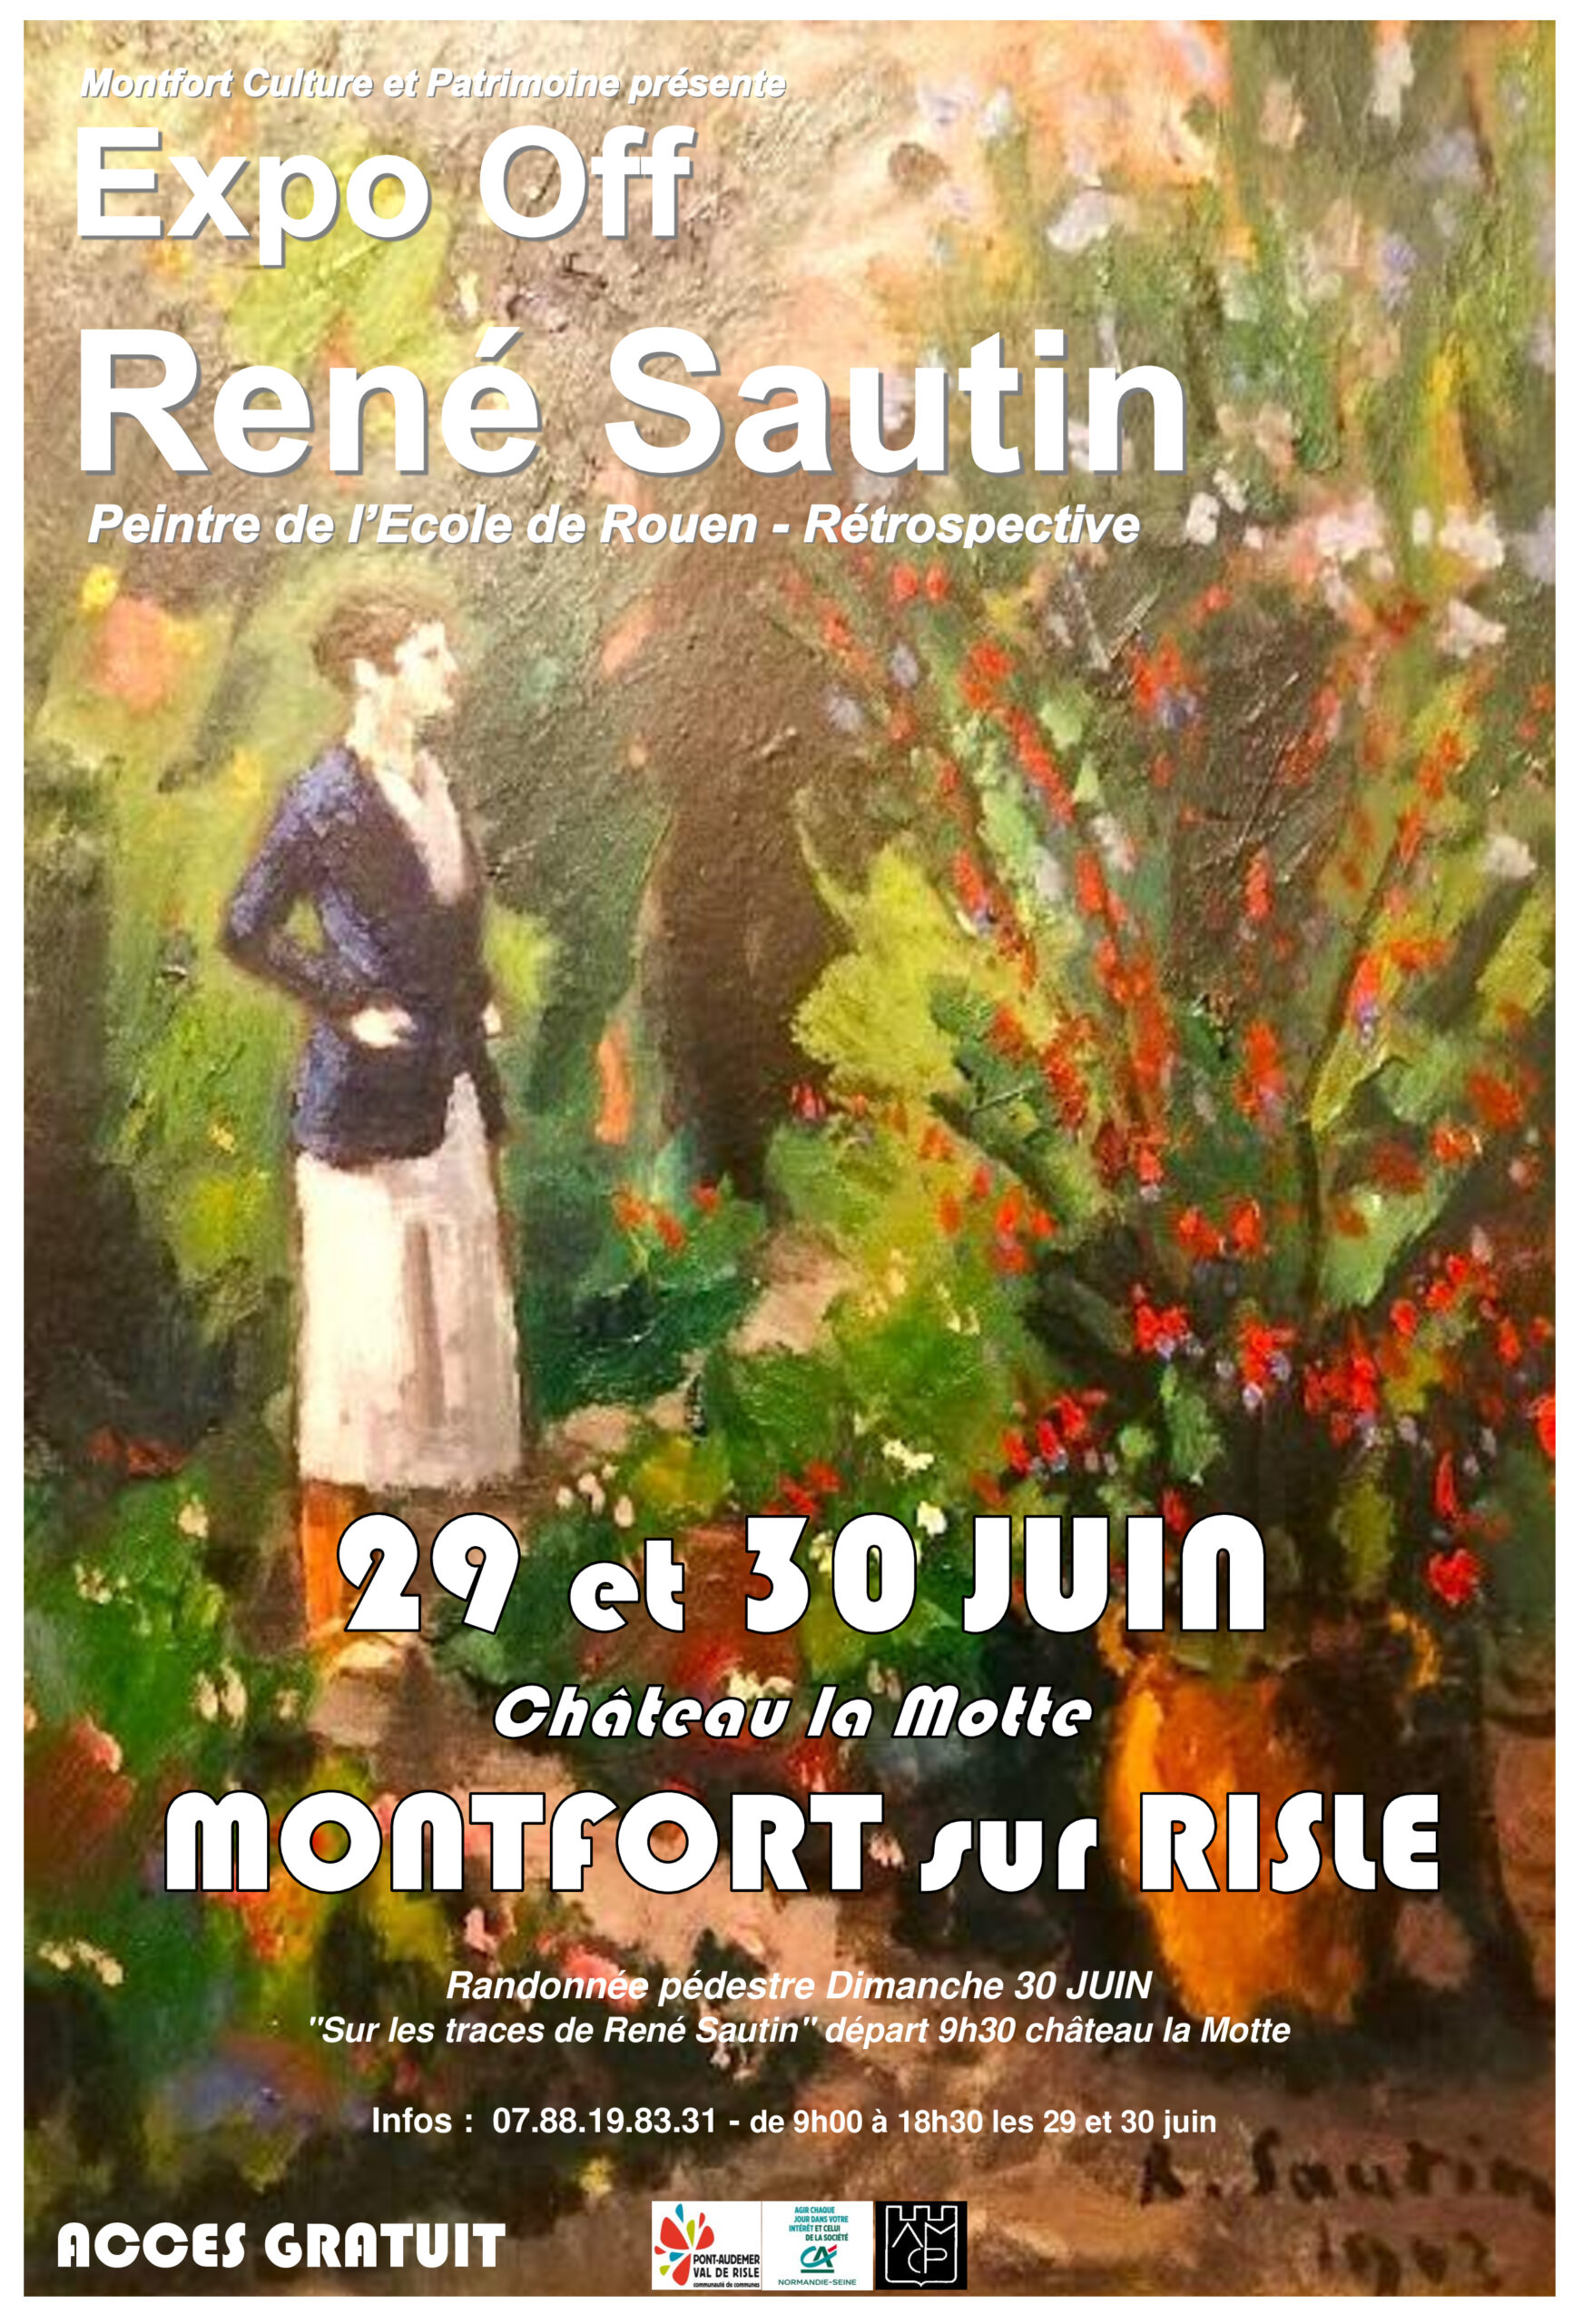 Affiche Expo Off R.Sautin V5 scaled